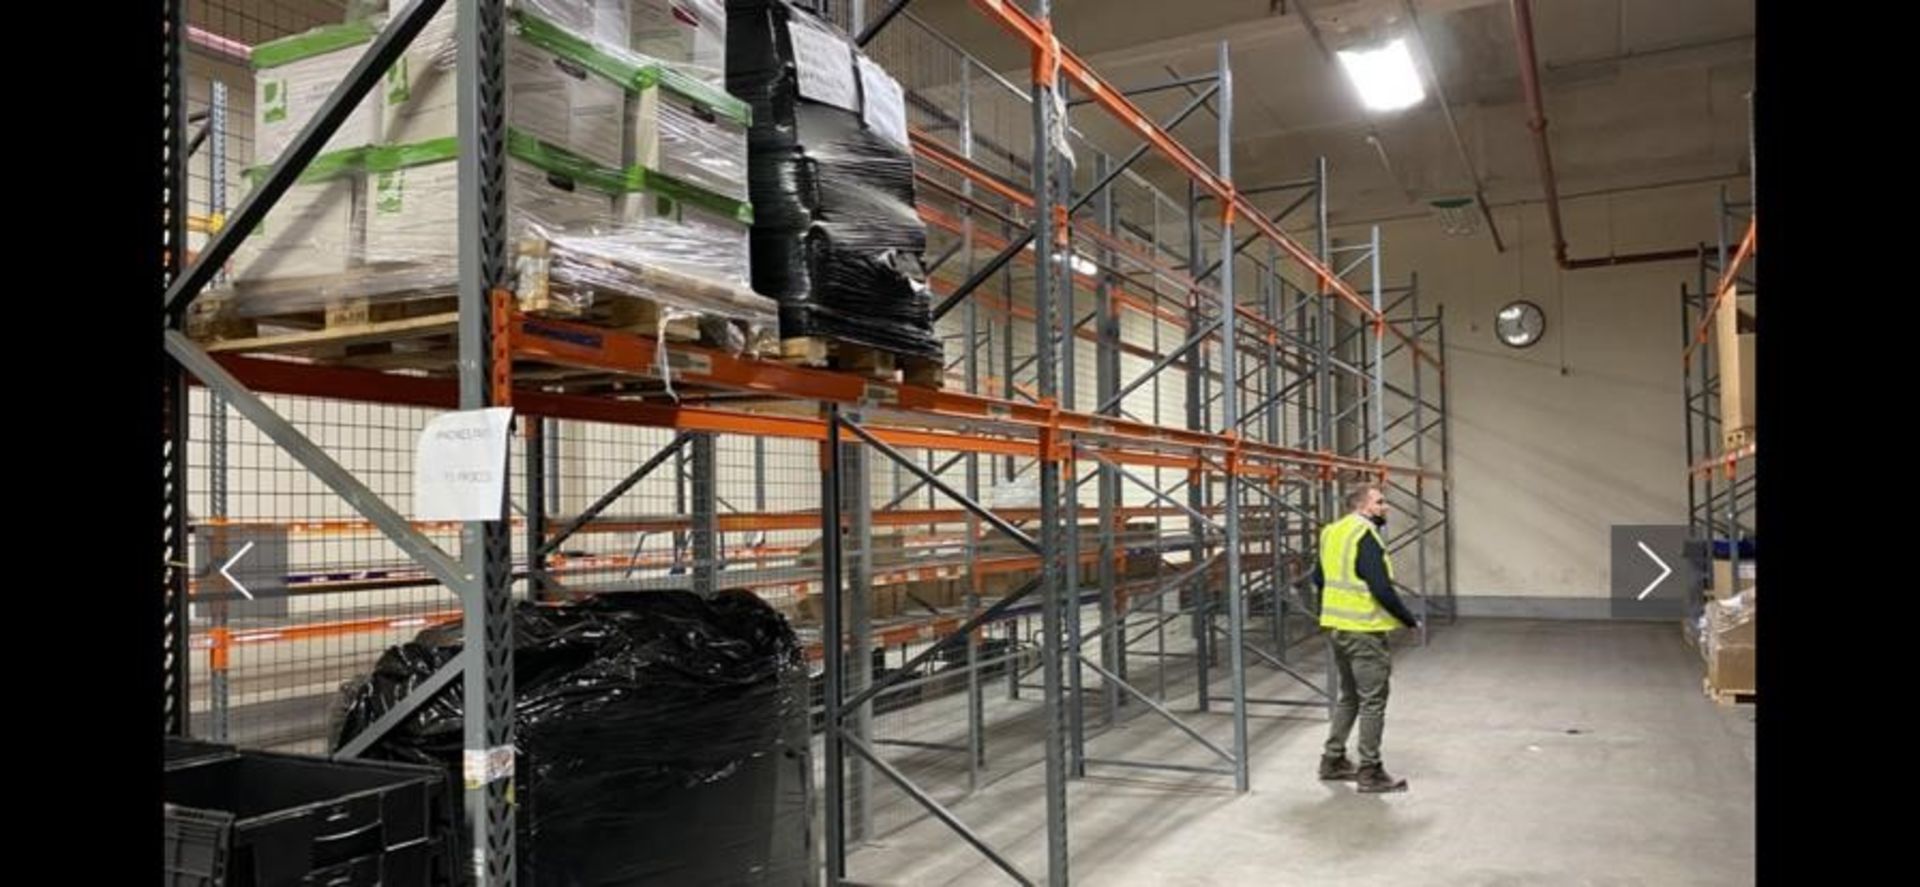 10 BAYS OF WAREHOUSE RACKING. IN EXCELLA - Image 5 of 7